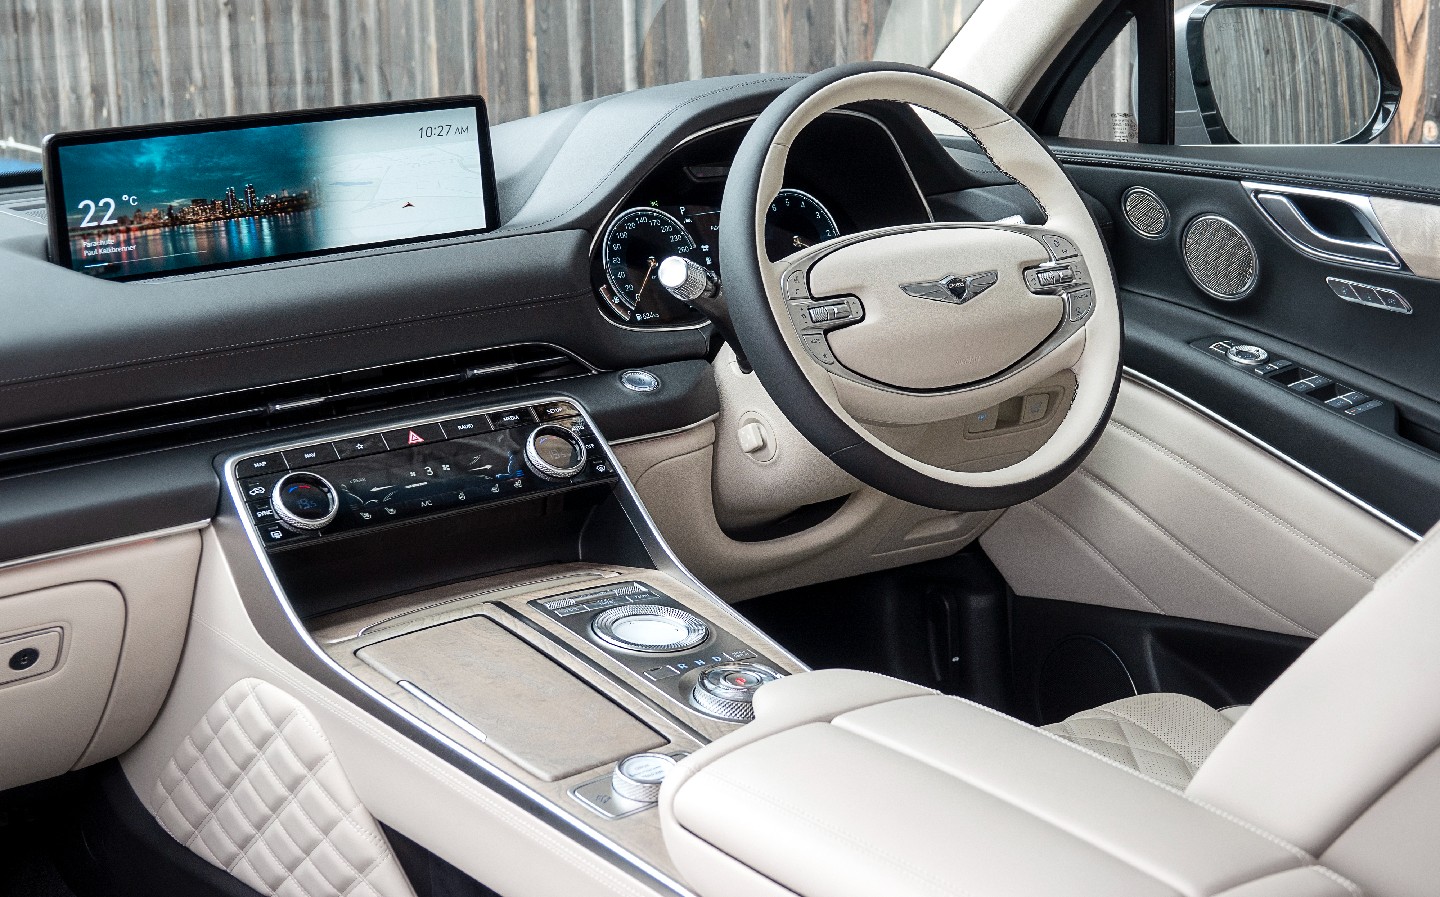 Interior - Genesis GV80 2021 review by Will Dron for Sunday Times Driving.co.uk